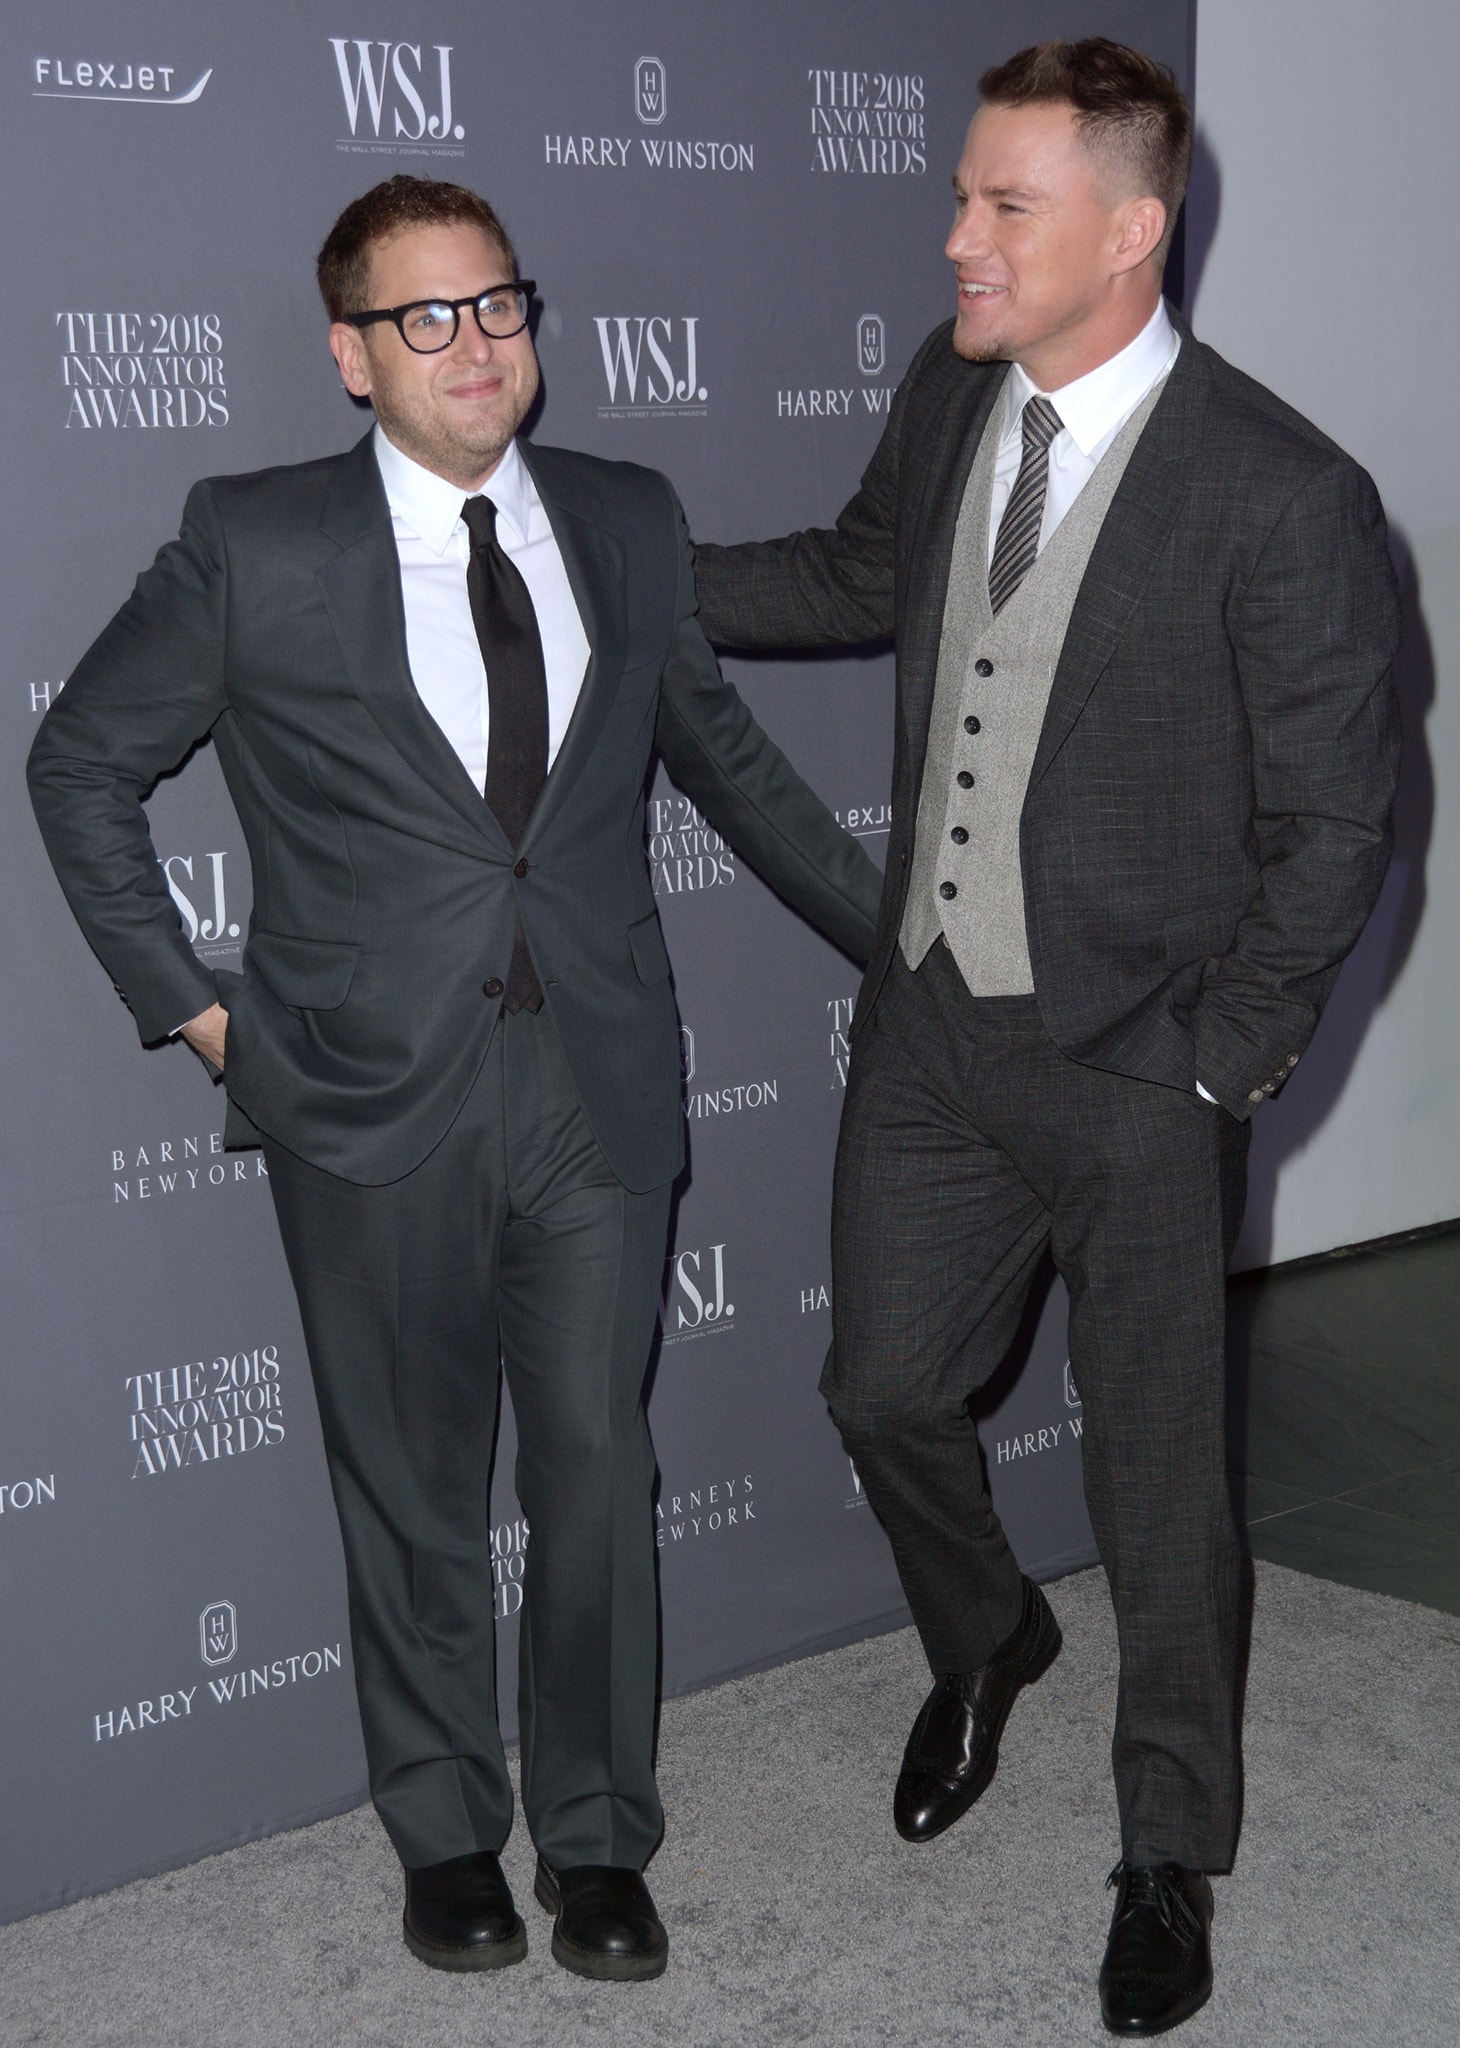 Jonah Hill asked for Channing Tatum's advice about losing weight